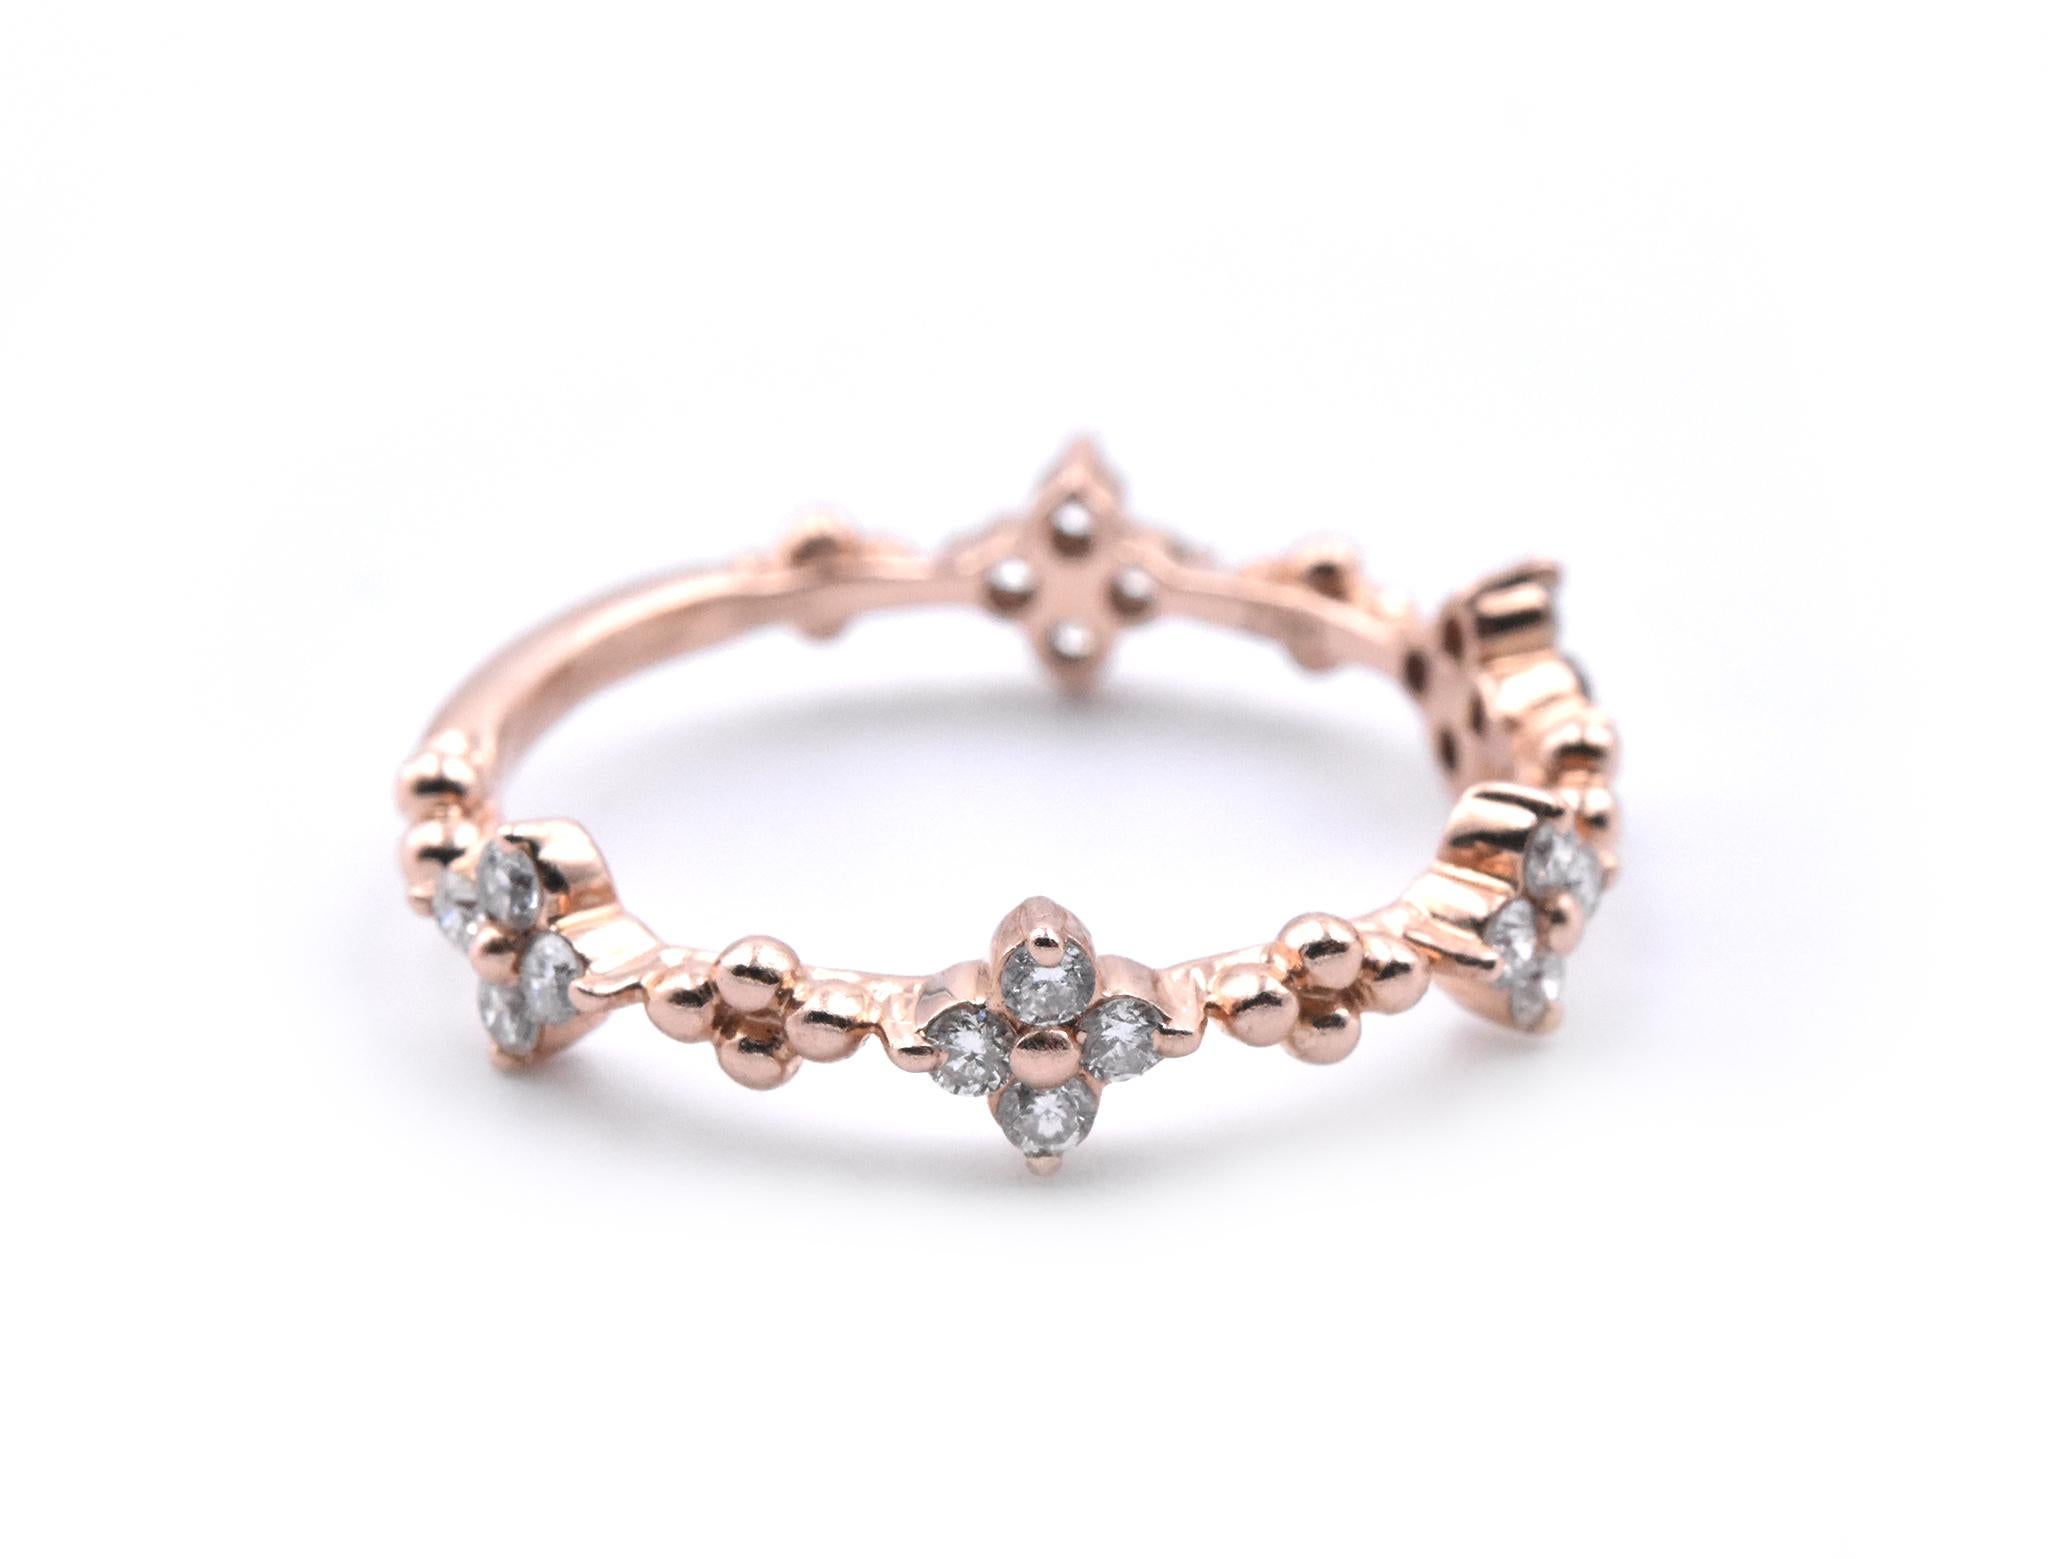 Designer: custom design
Material: 14k rose gold
Diamonds: 20 round brilliant cut= 0.36cttw
Color: H-I
Clarity: VS
Size: 7 please allow two additional shipping days for sizing requests)
Dimensions: ring is 4.83mm wide
Weight: 1.90 grams
